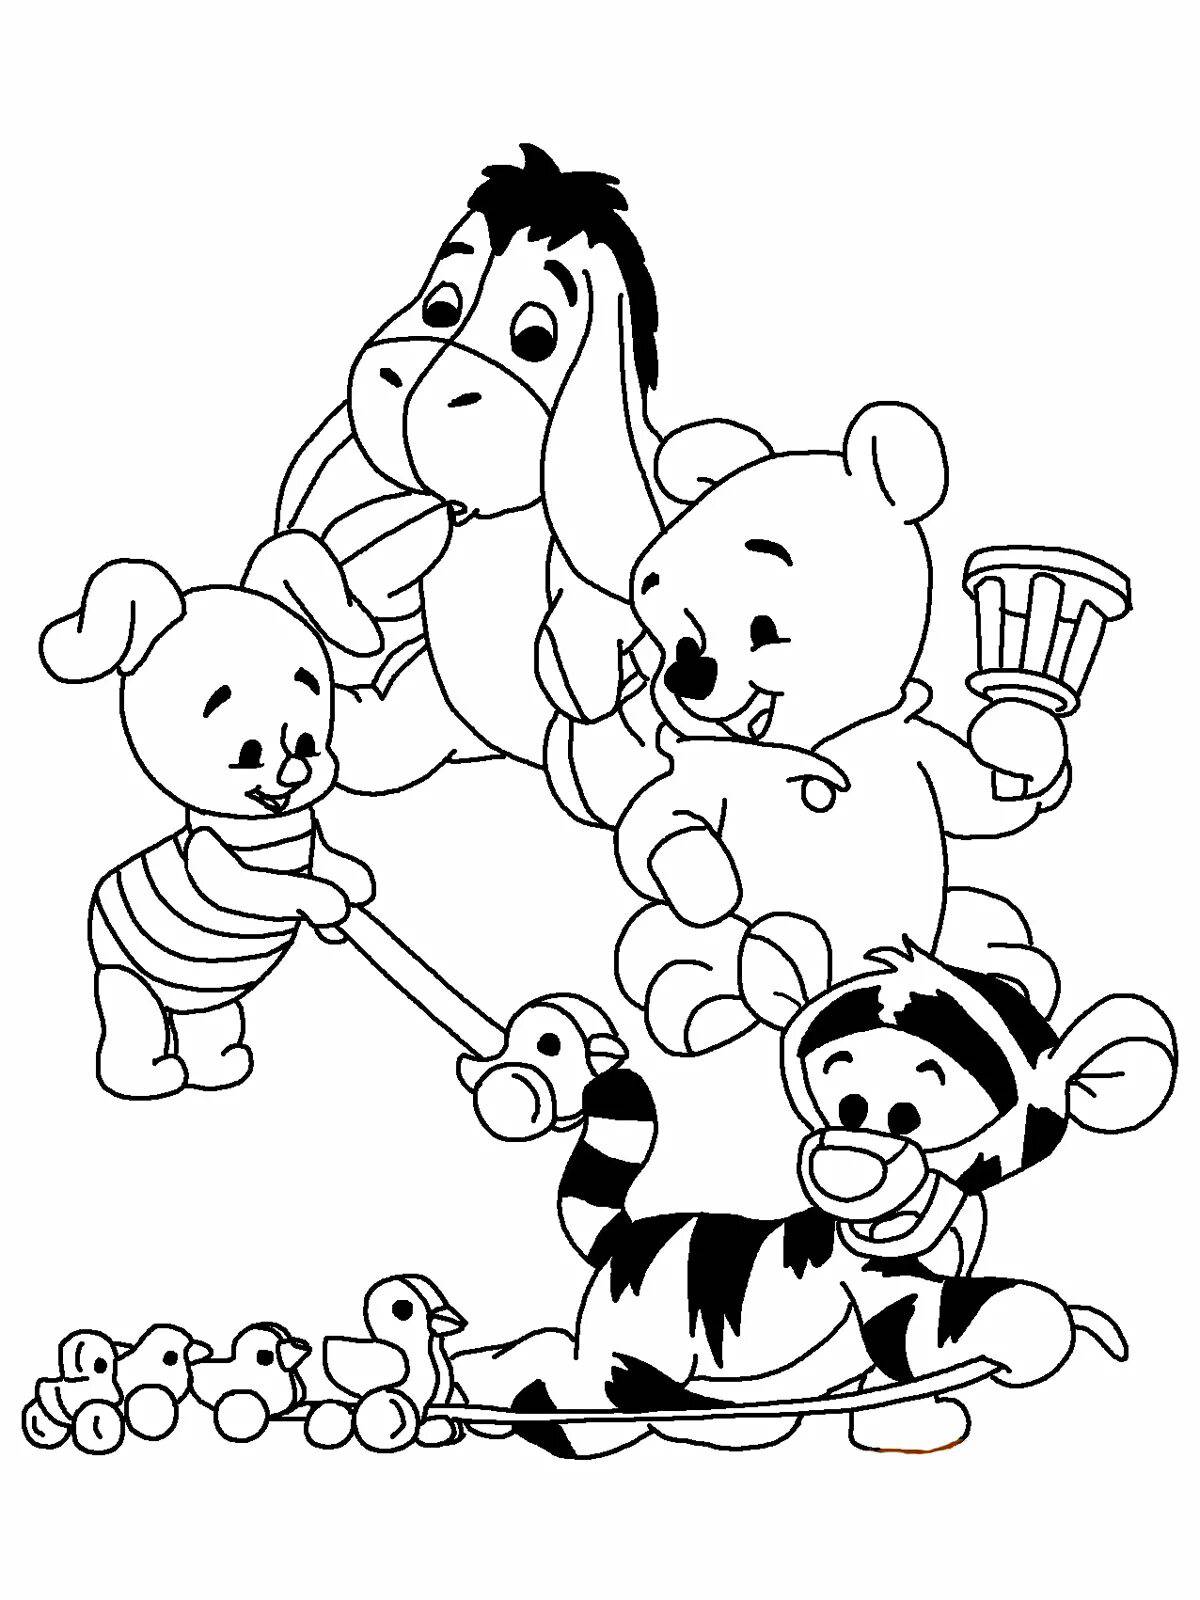 Winnie the pooh and his friends #7